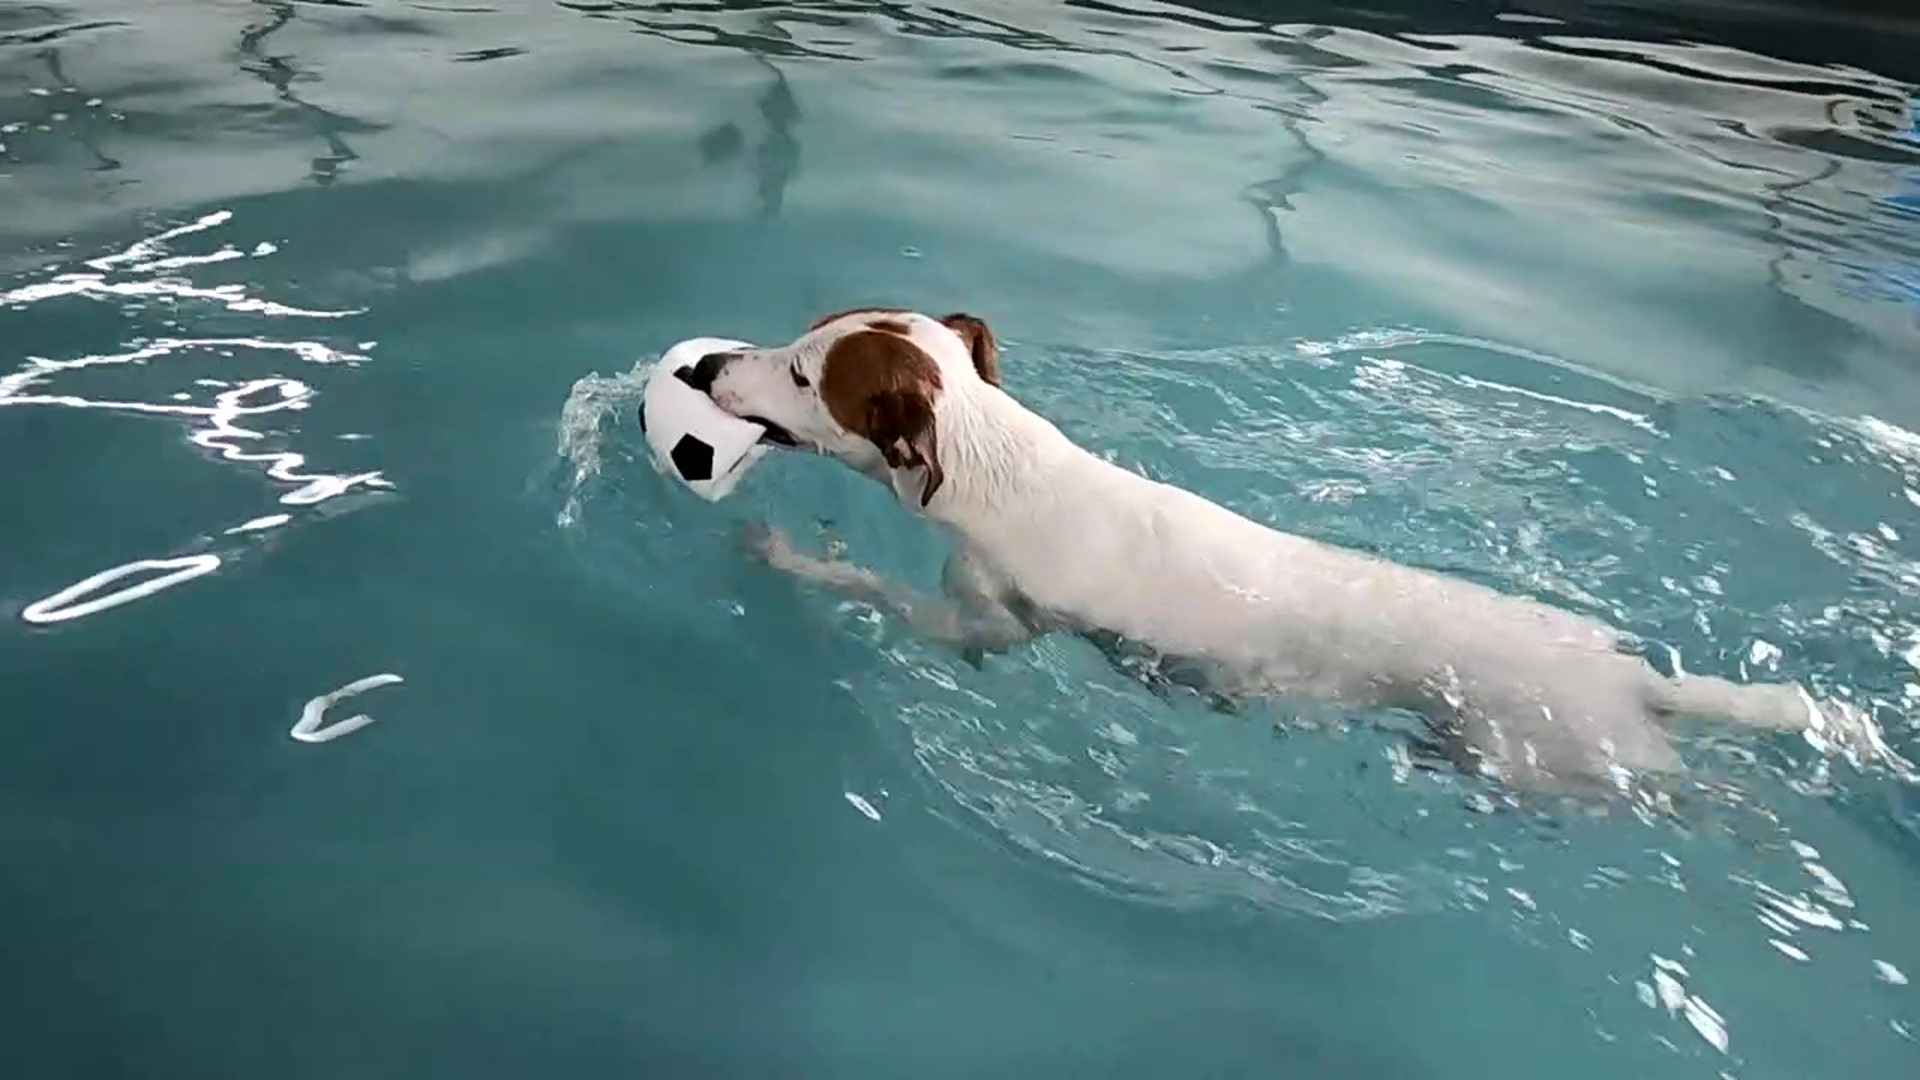 A woman from Northumberland County opened central Pennsylvania's first year-round indoor swimming pool for dogs.